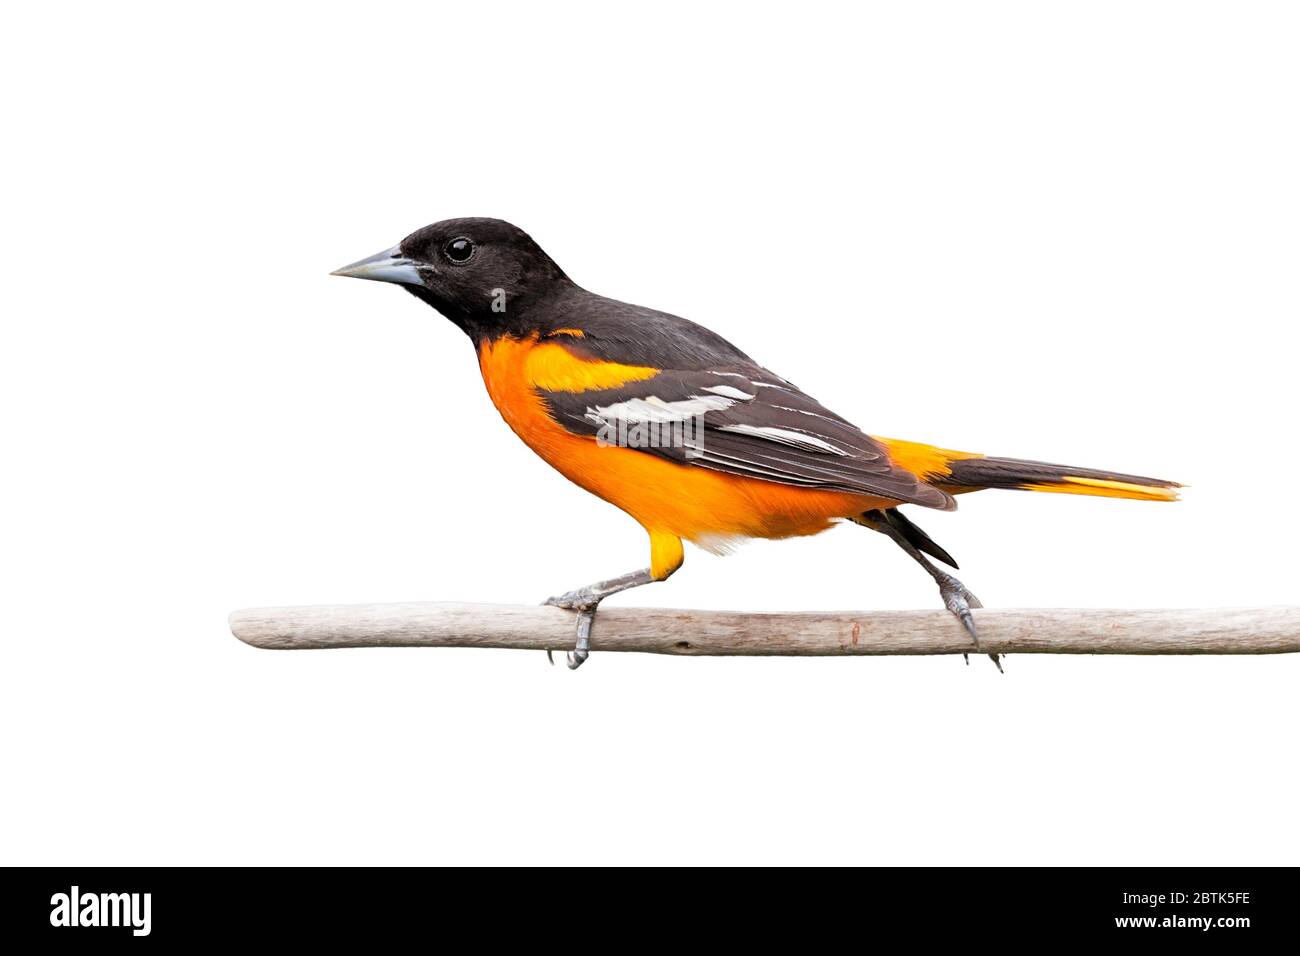 With its legs fully spread apart, a baltimore oriole walks across a branch. White background Stock Photo